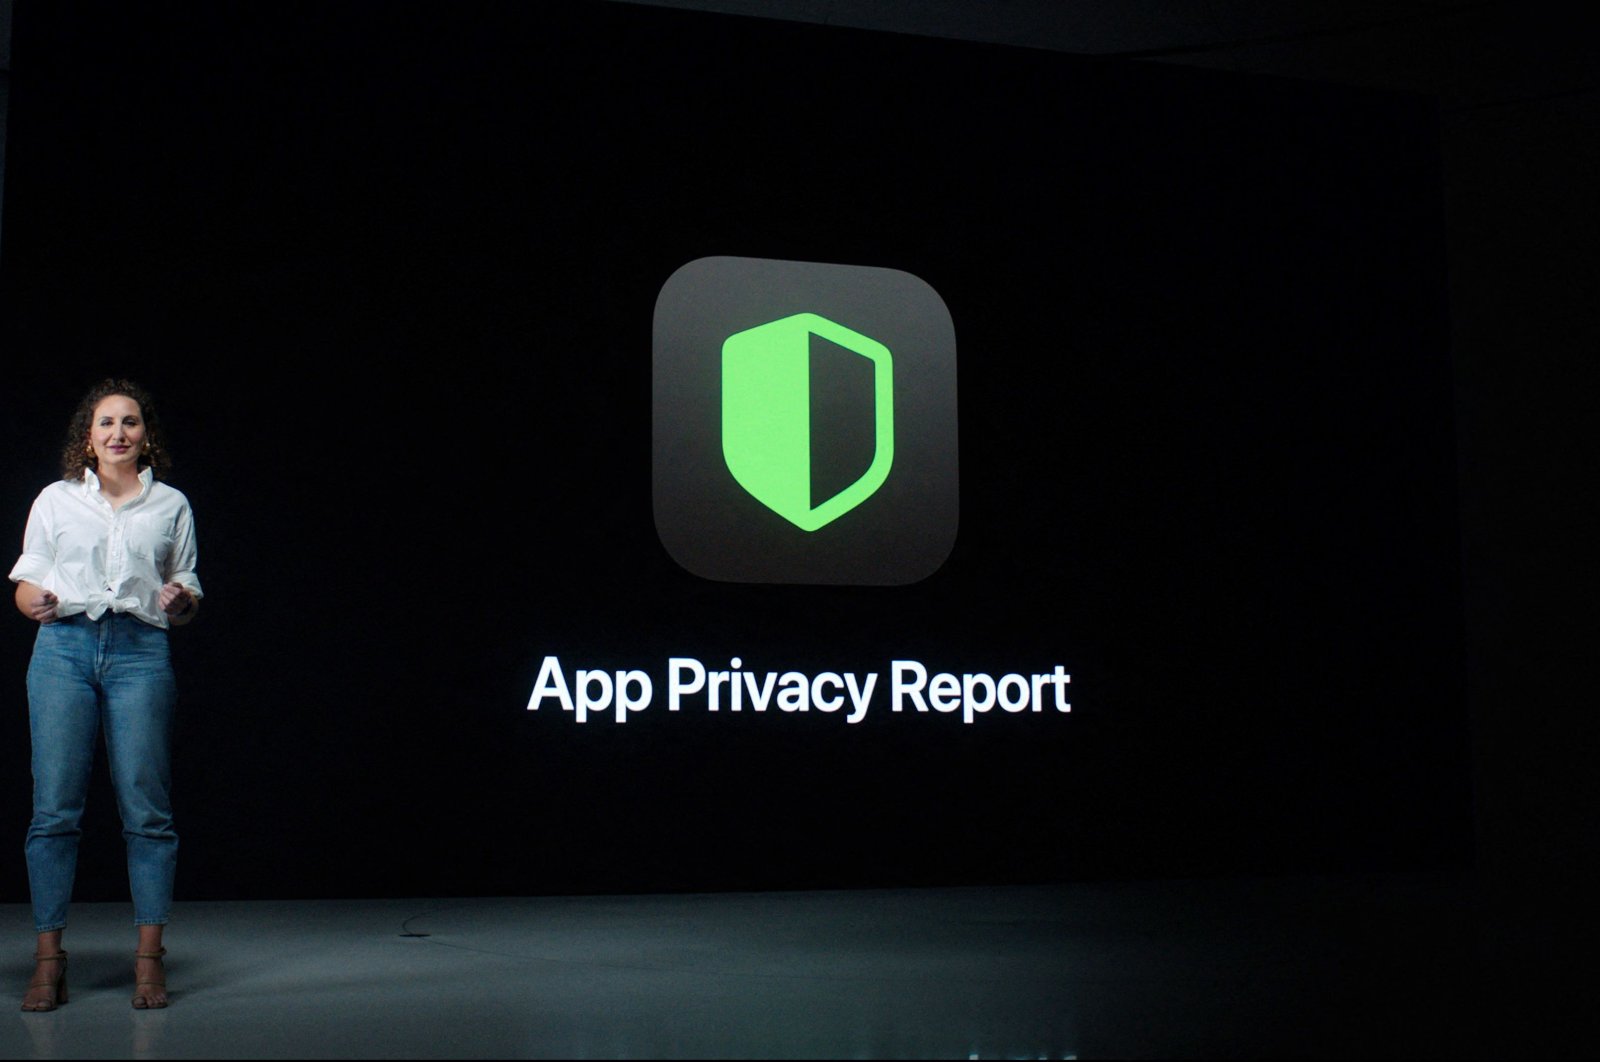 Apple's head of User Privacy Engineering, Katie Skinner, introduces the App Privacy Report at Apple's Worldwide Developers Conference at Apple Park in Cupertino, California, in a still image taken from video and obtained June 7, 2021. (Photo by Apple via AFP)